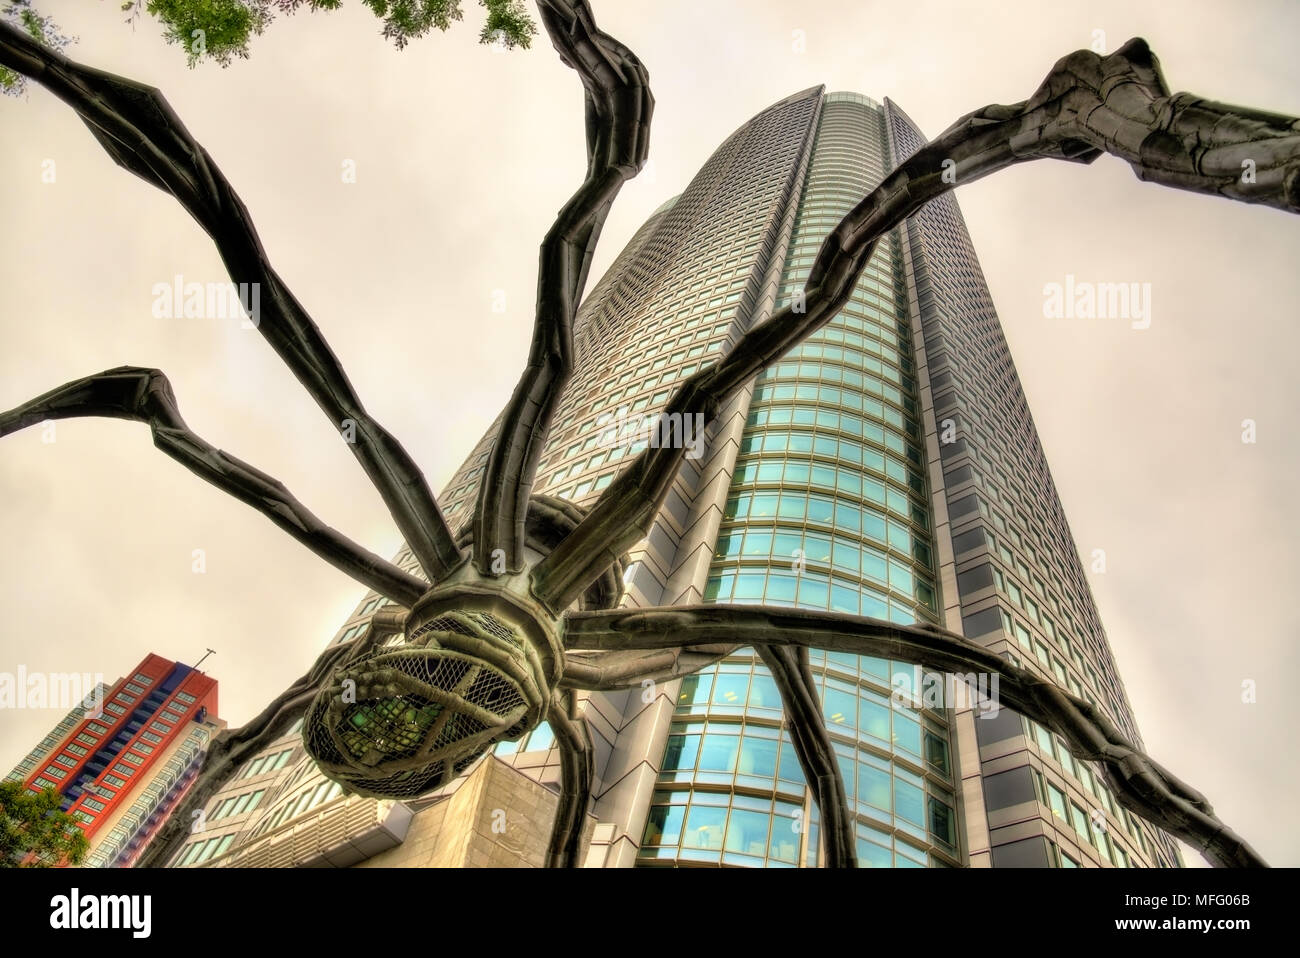 Maman, a spider sculpture, and Mori Tower in Roppongi Hills. Stock Photo